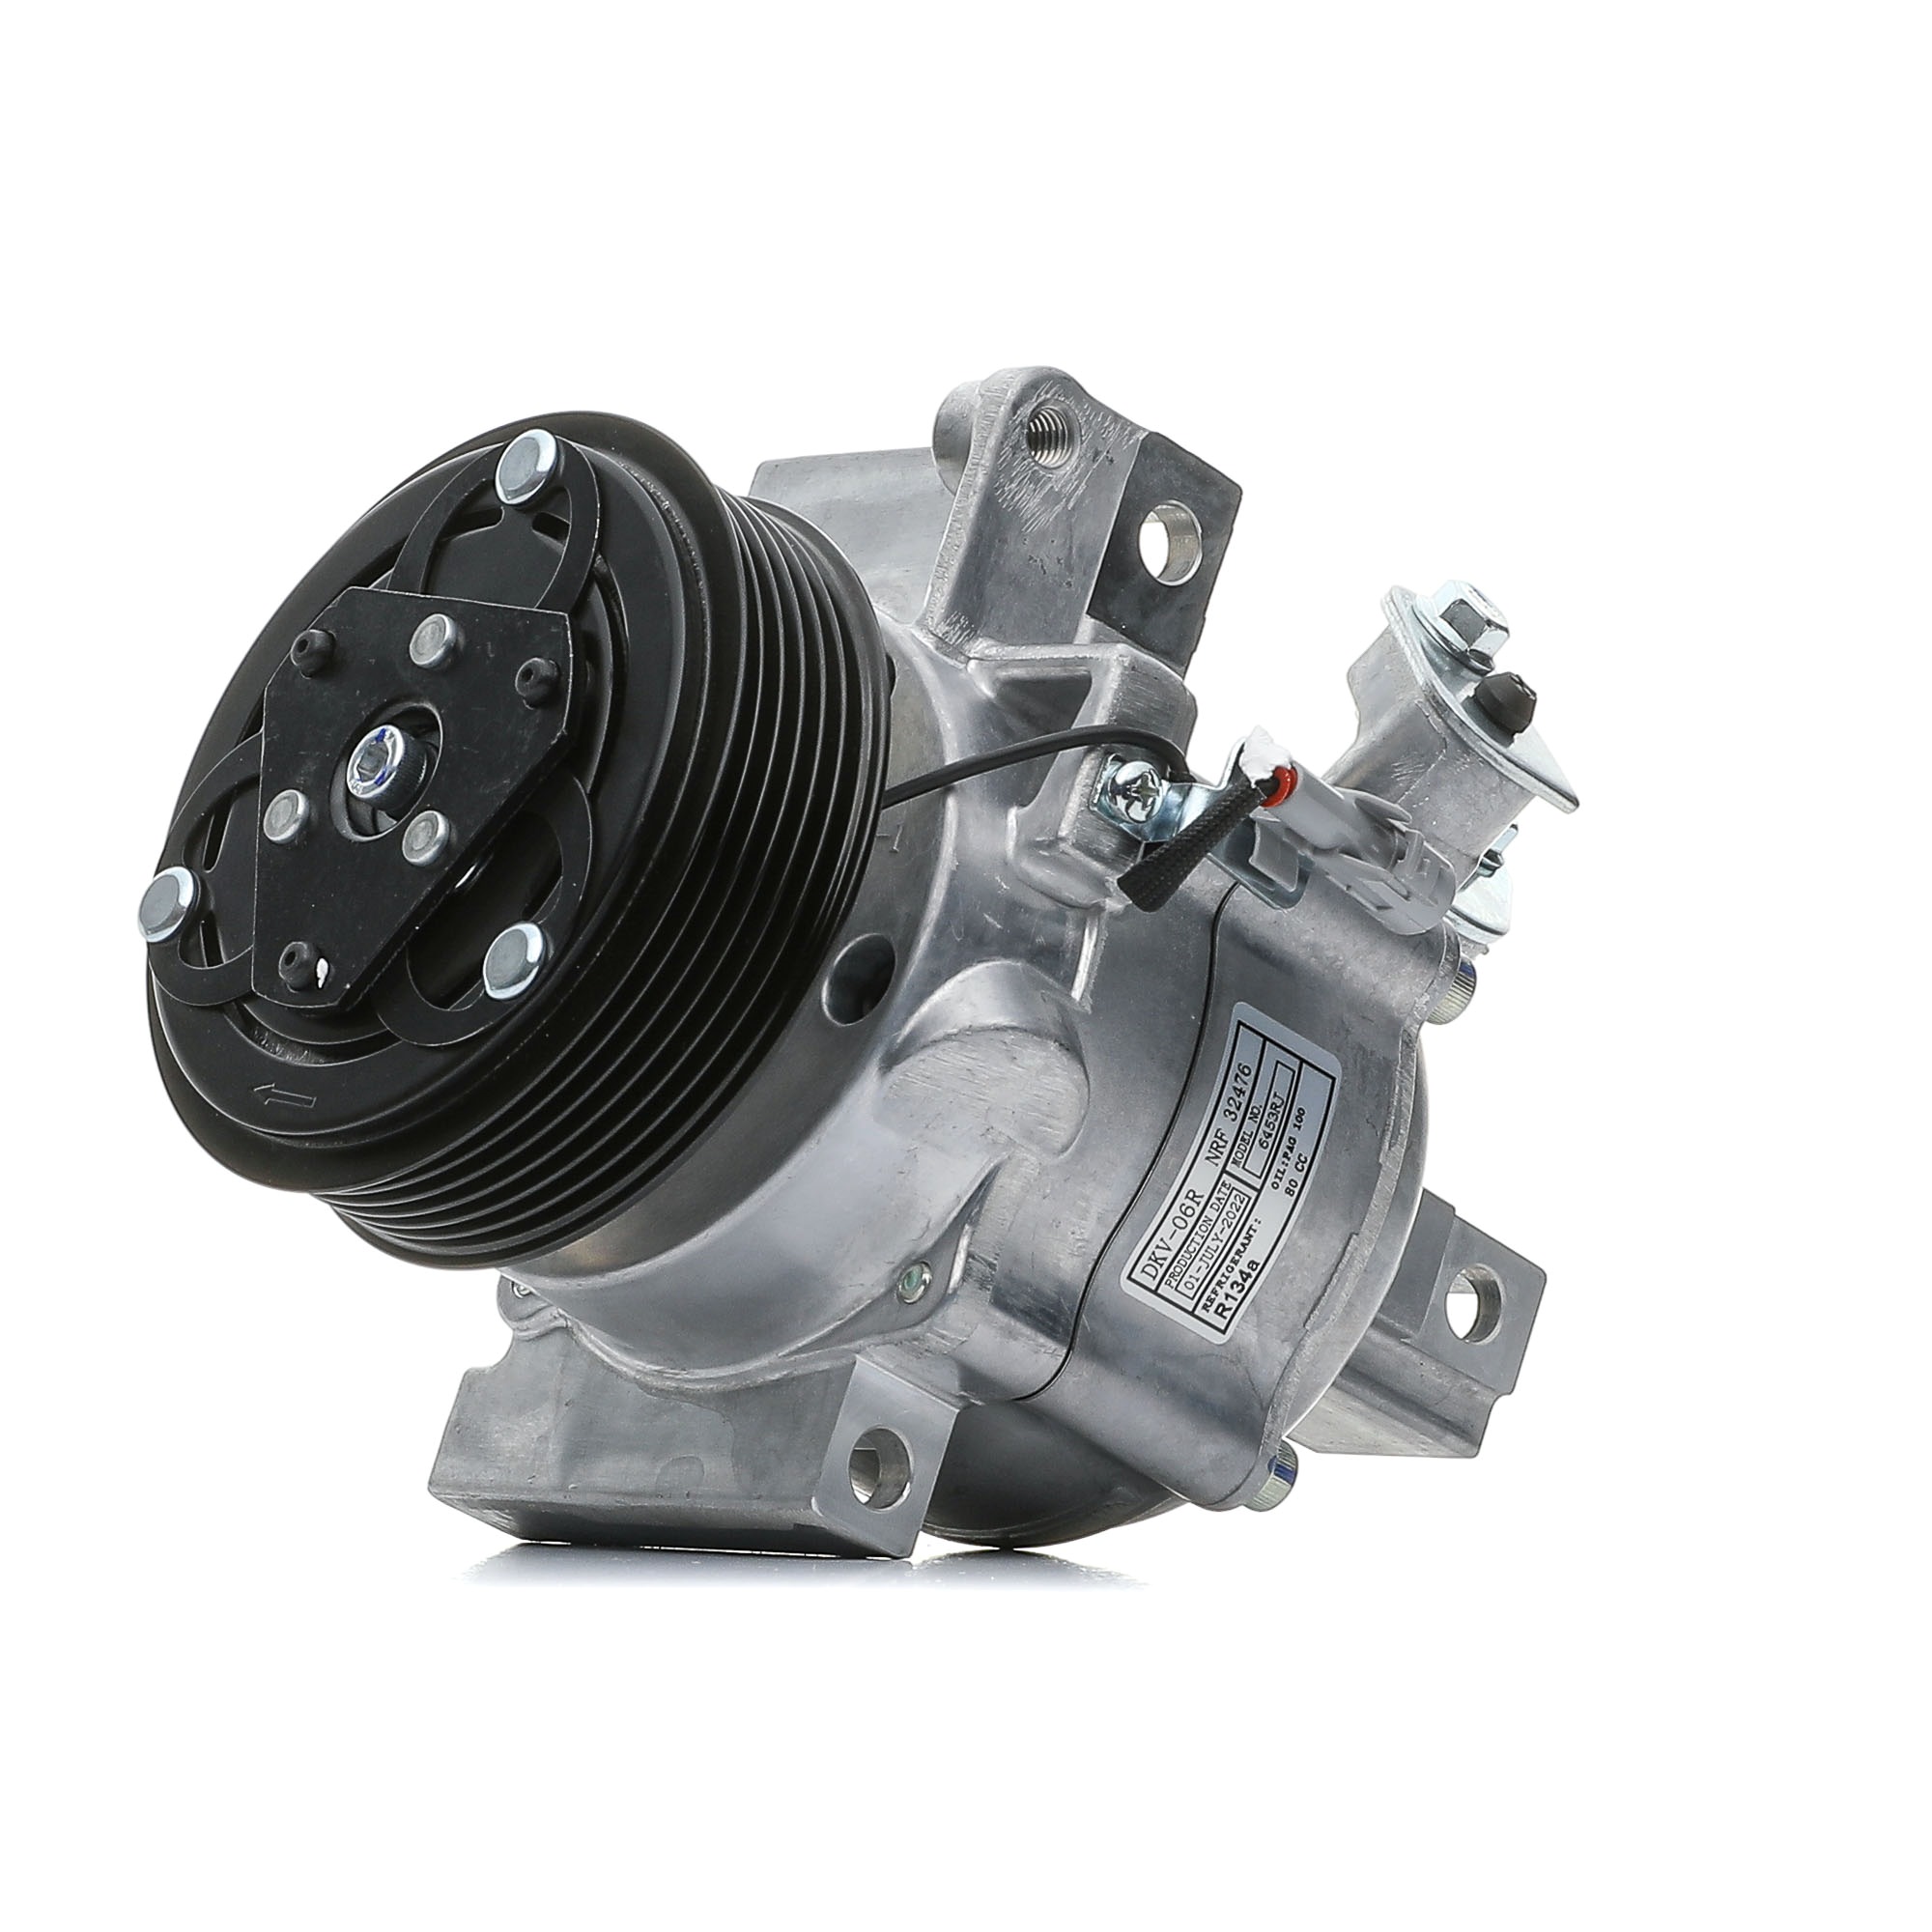 Peugeot Air conditioning compressor NRF 32476 at a good price